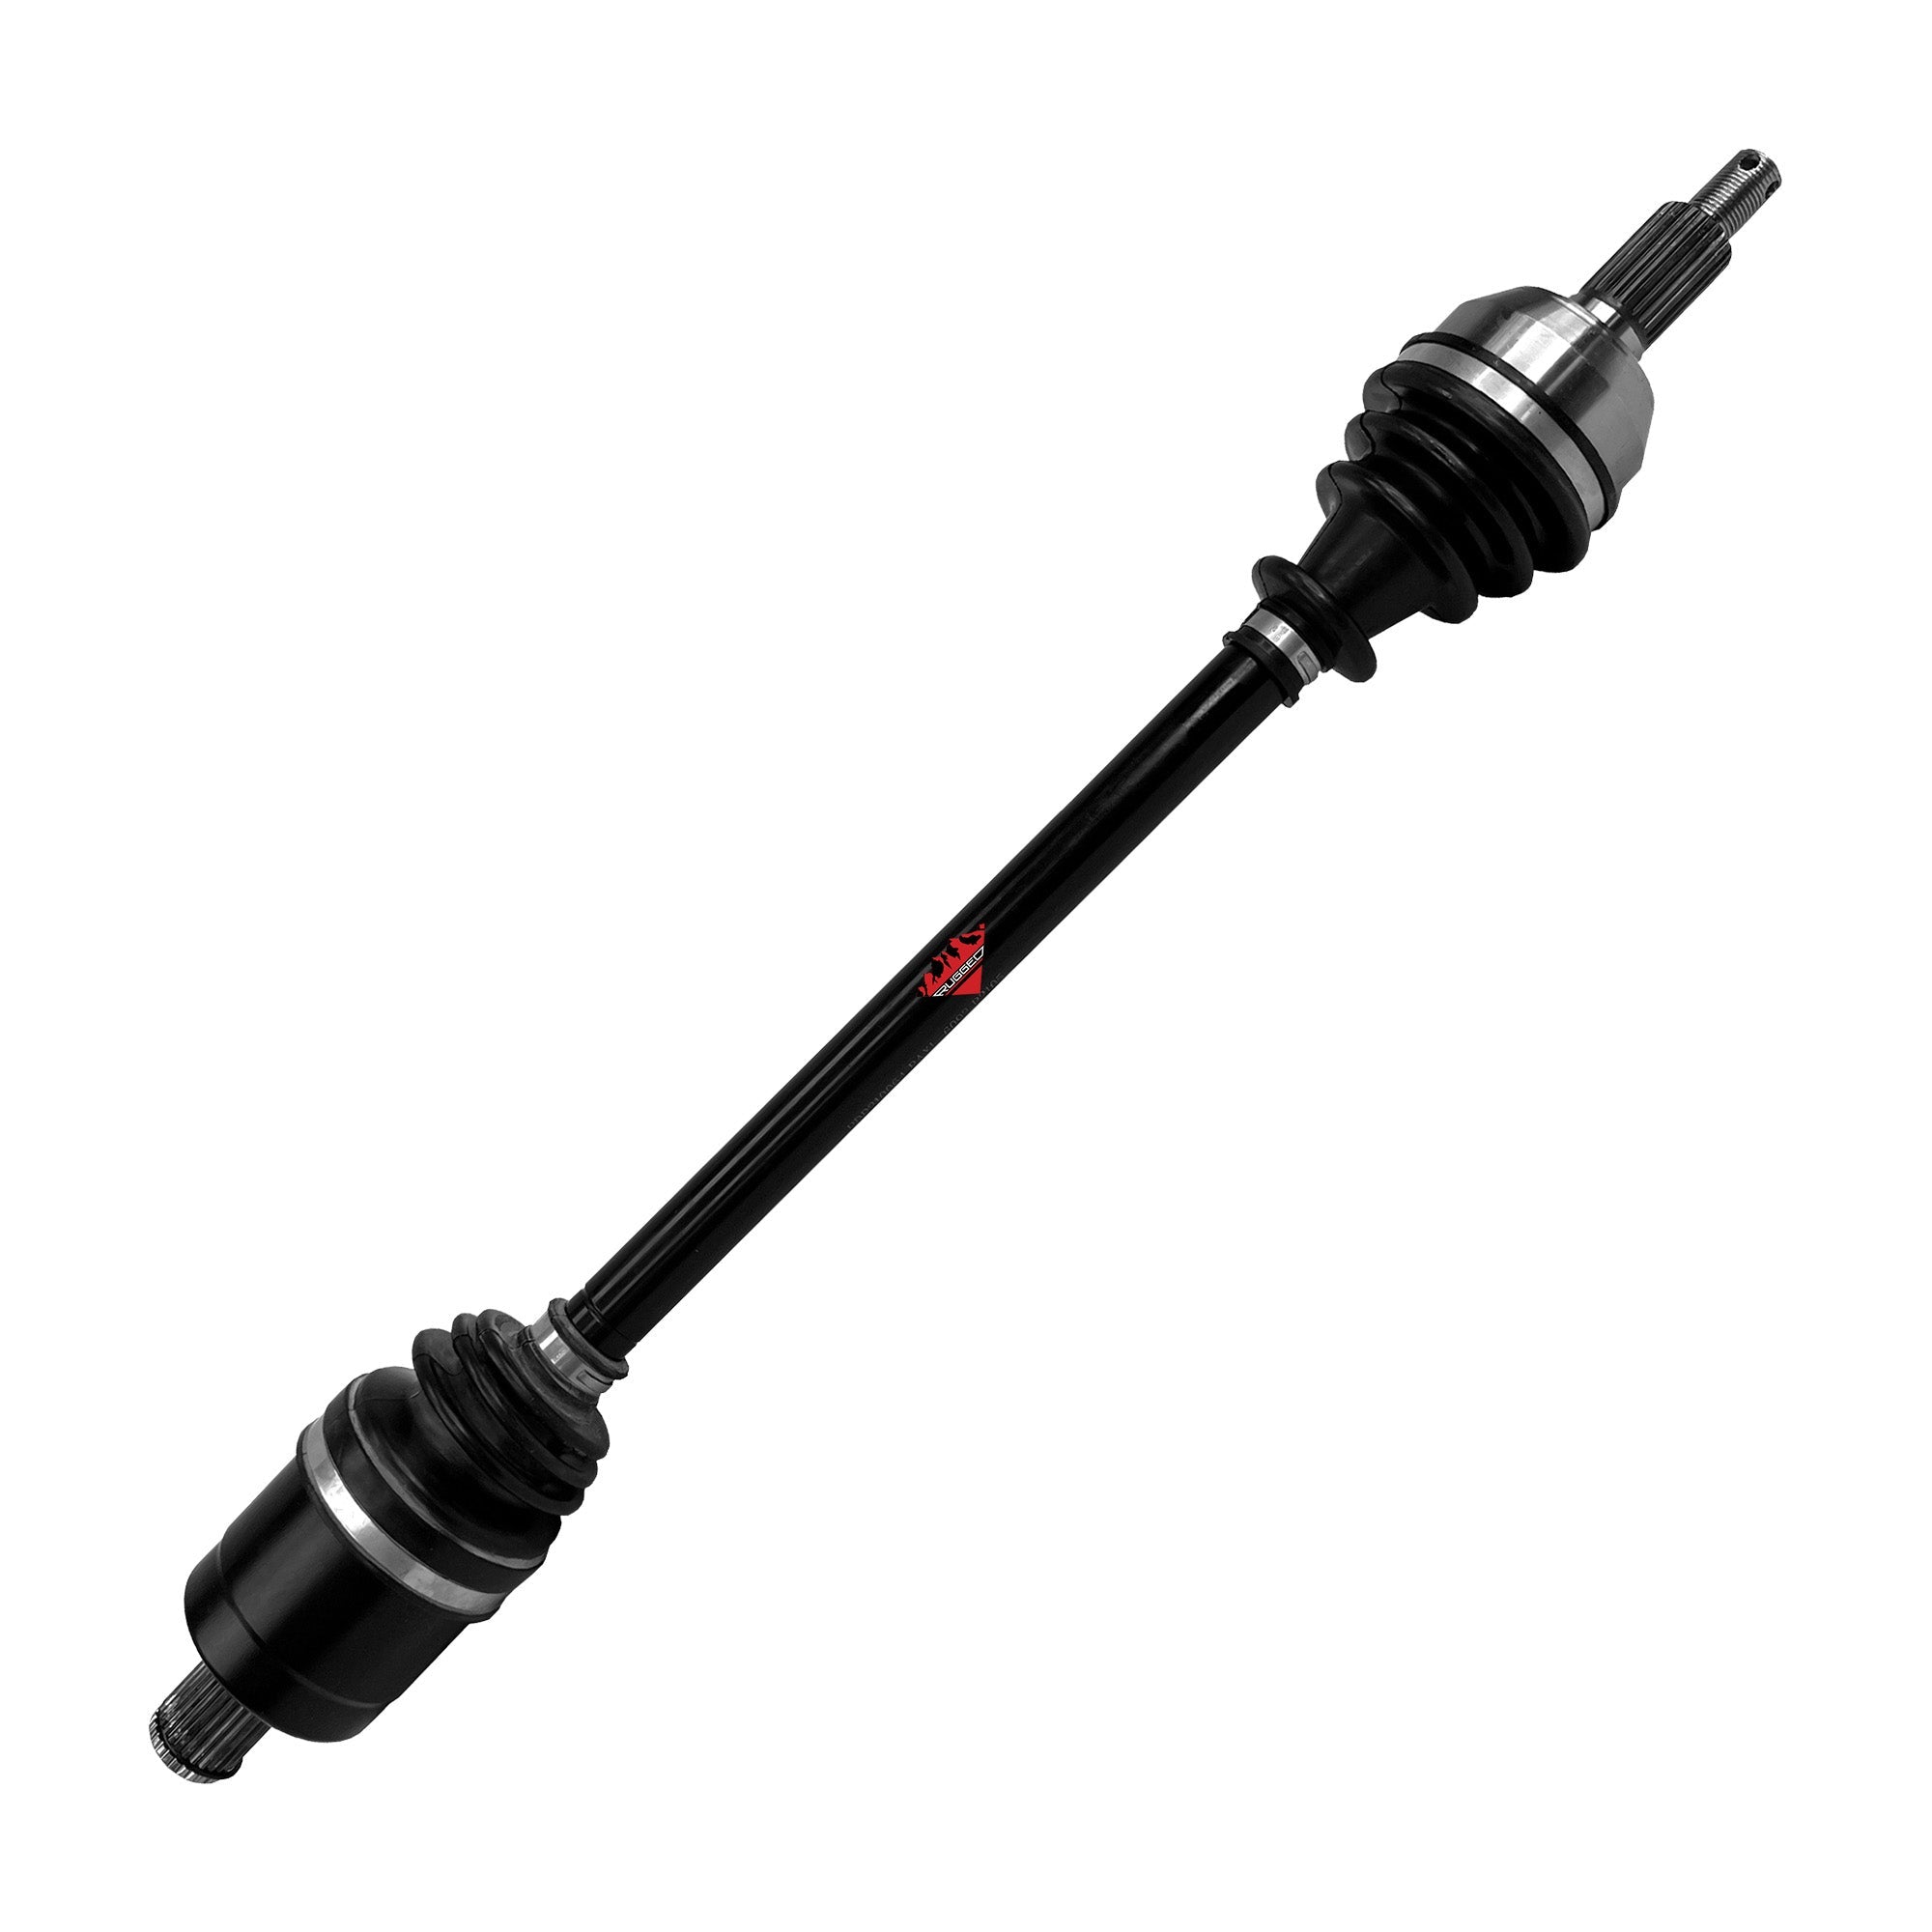 Performance Axle for Coleman Outfitter UT700 